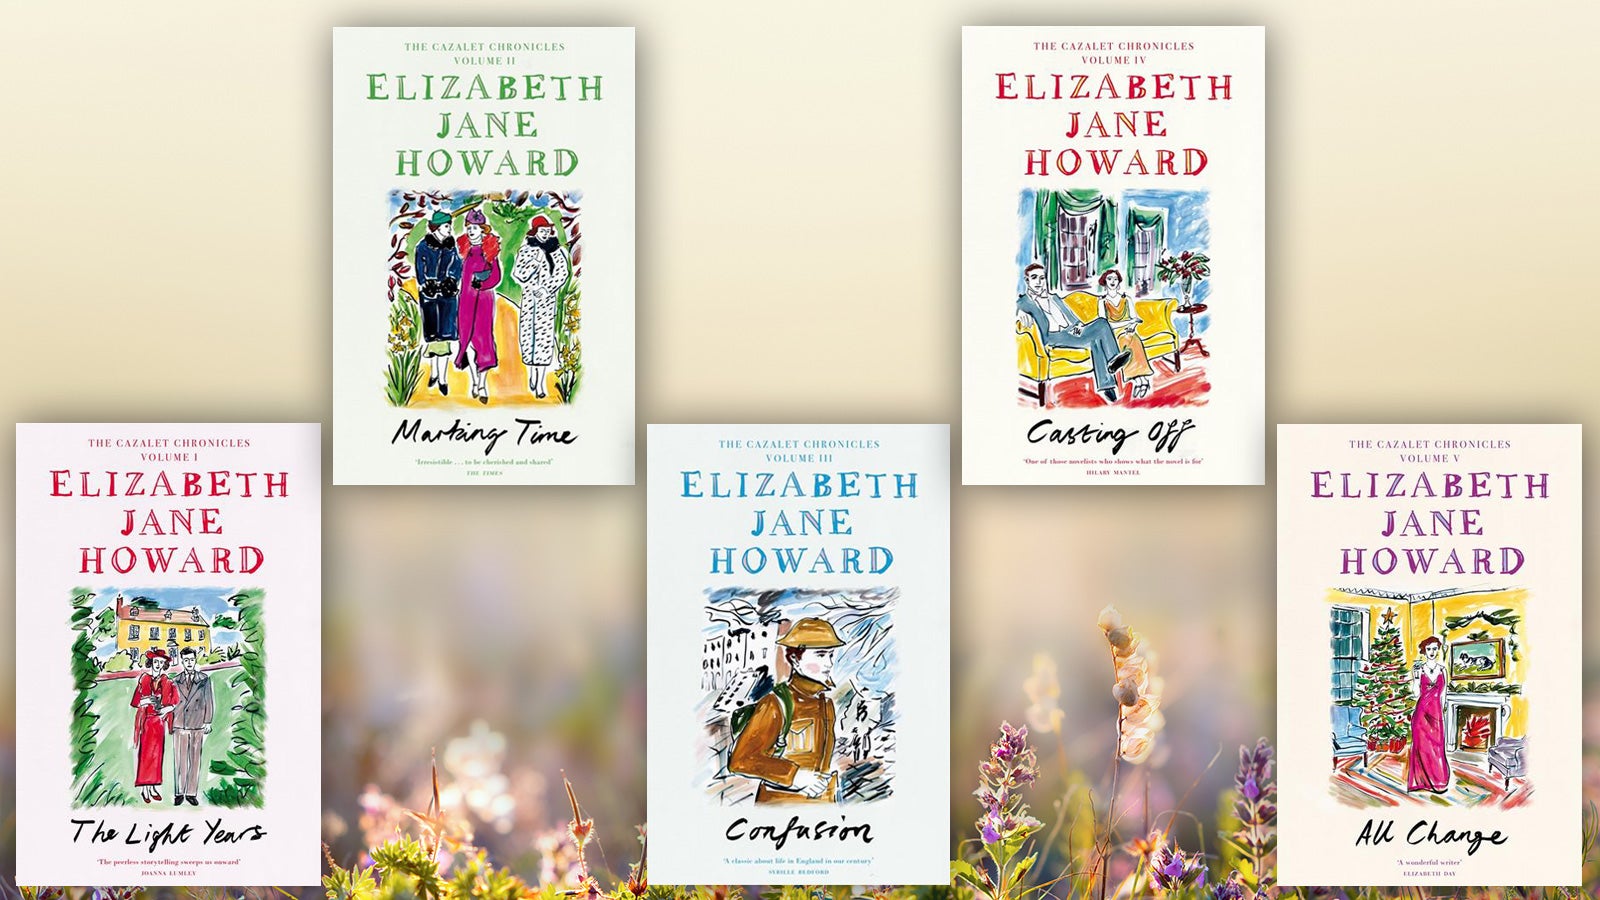 The covers of the five Cazalet Chronicles books by Elizabeth Jane Howard, against a background of wildflowers